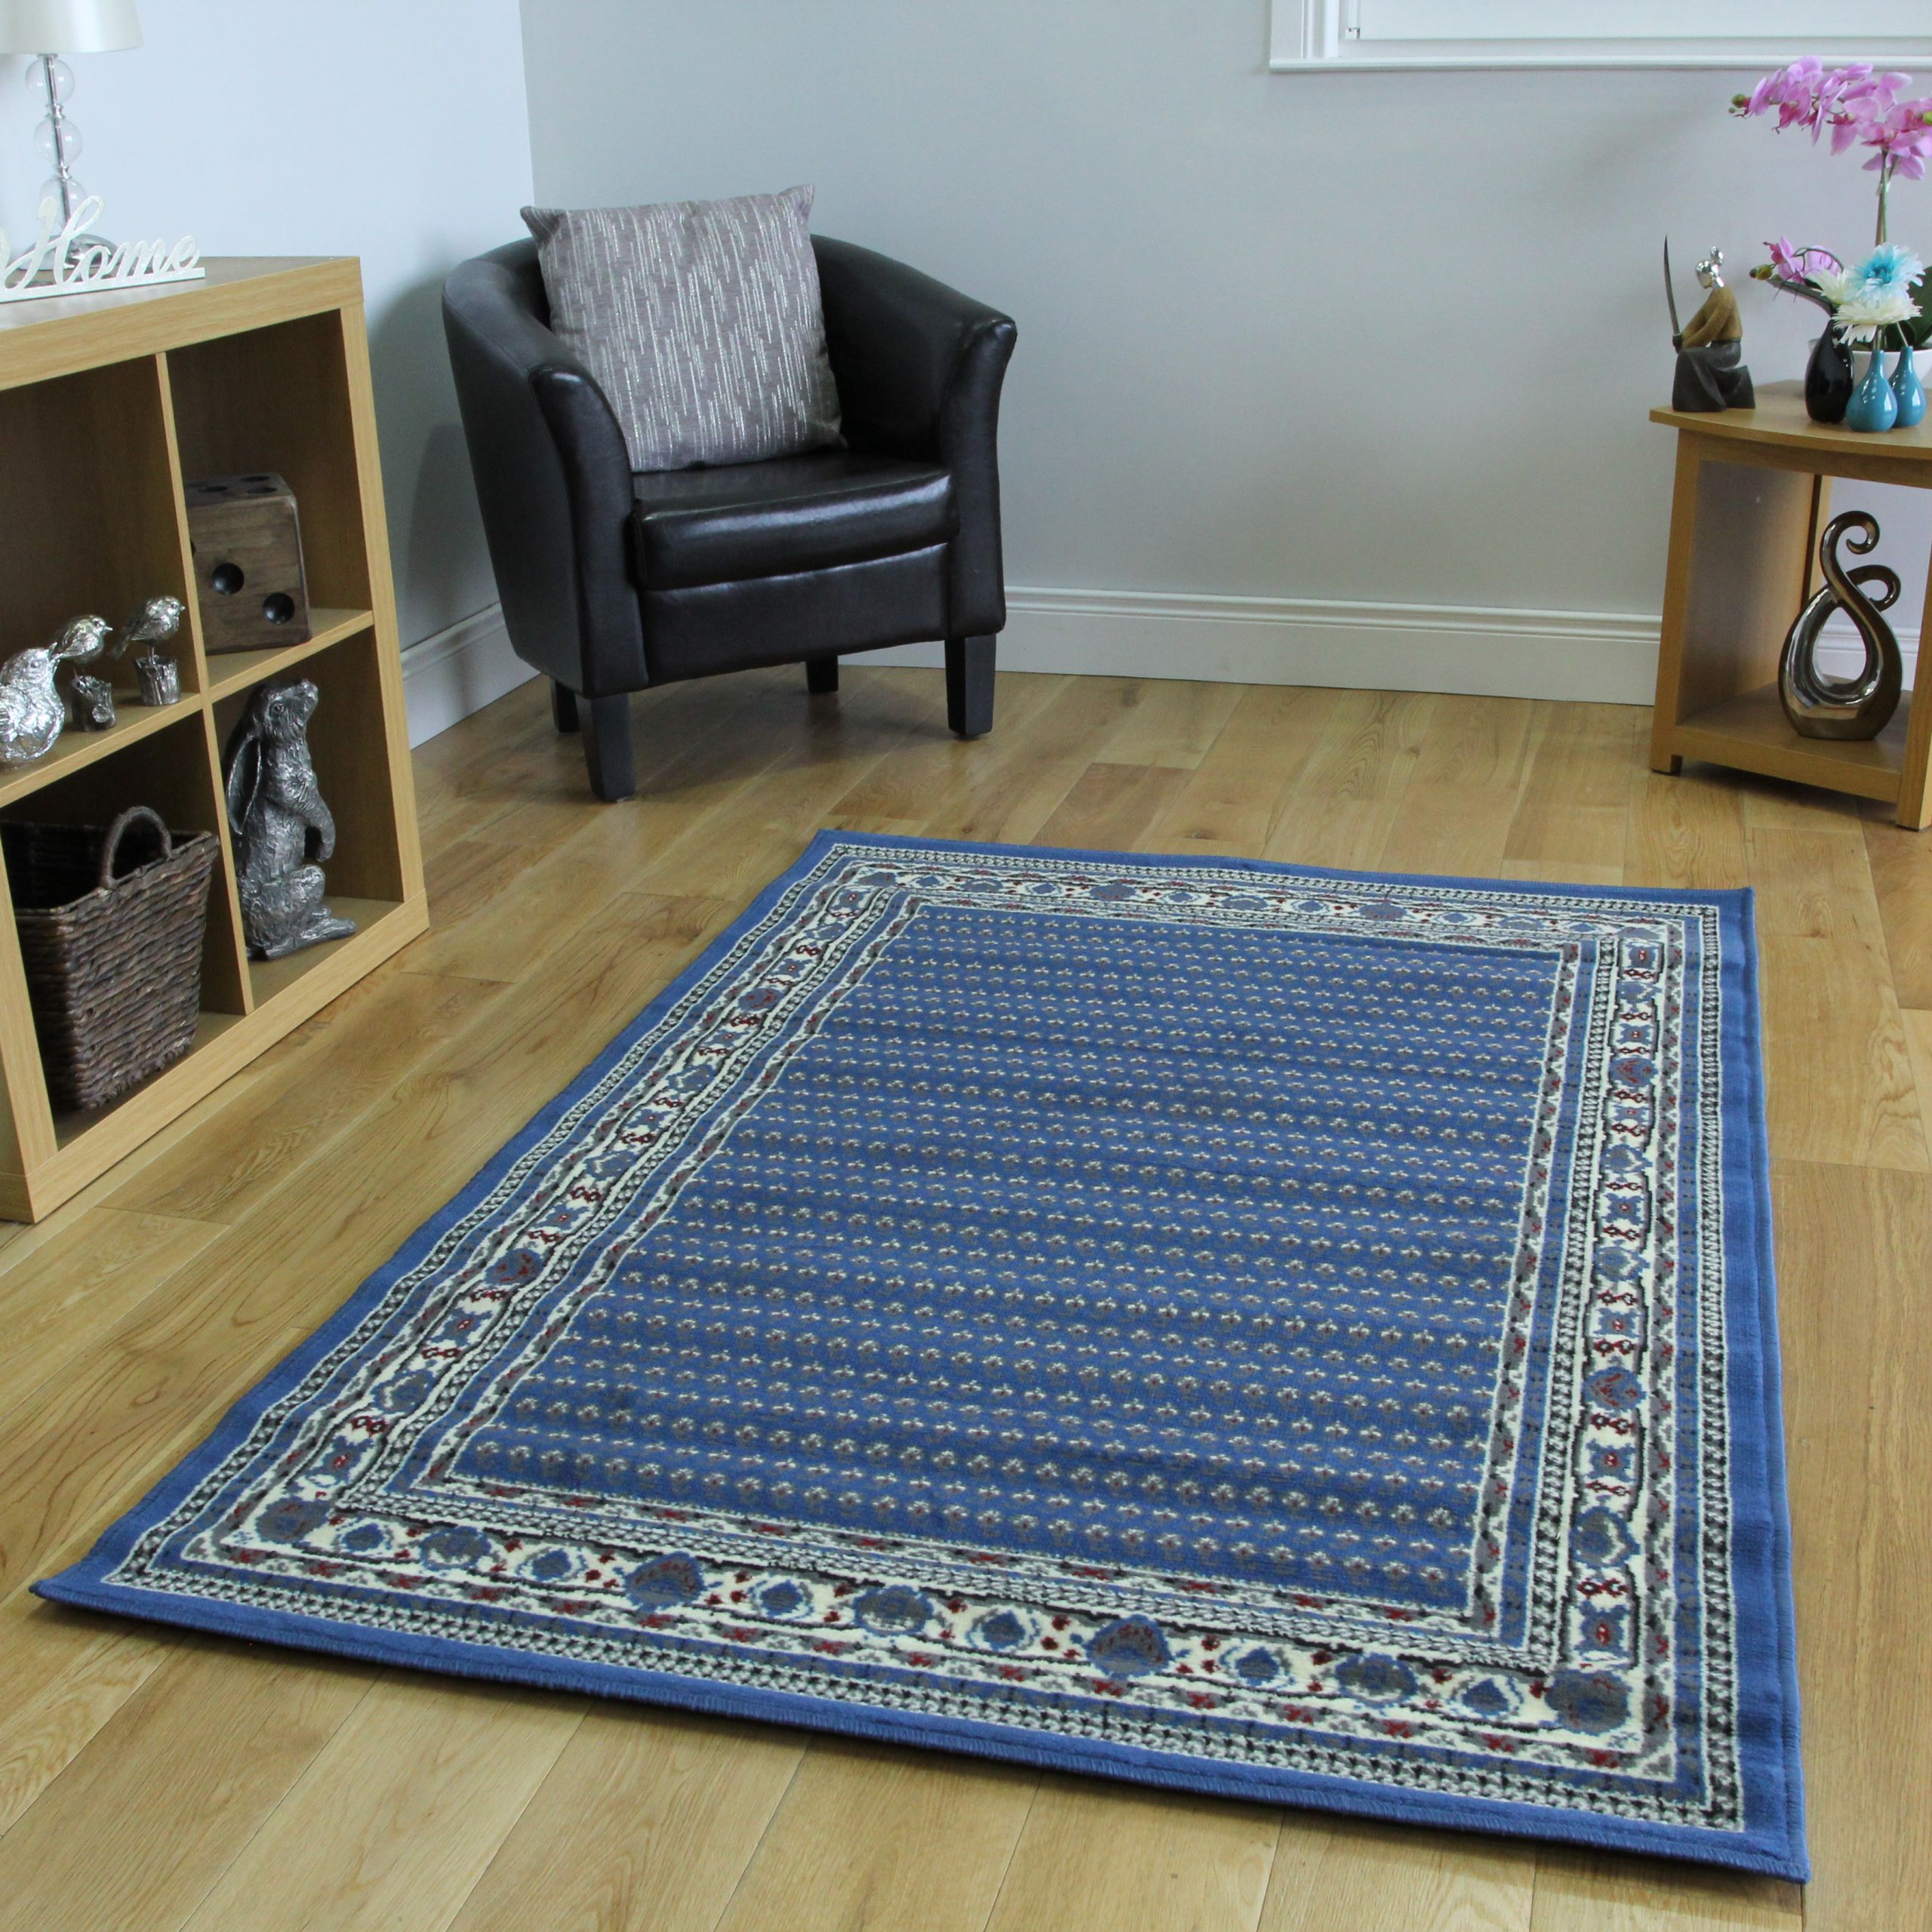 Traditional Rugs For Living Room
 Blue Bordered Traditional Living Room Rug